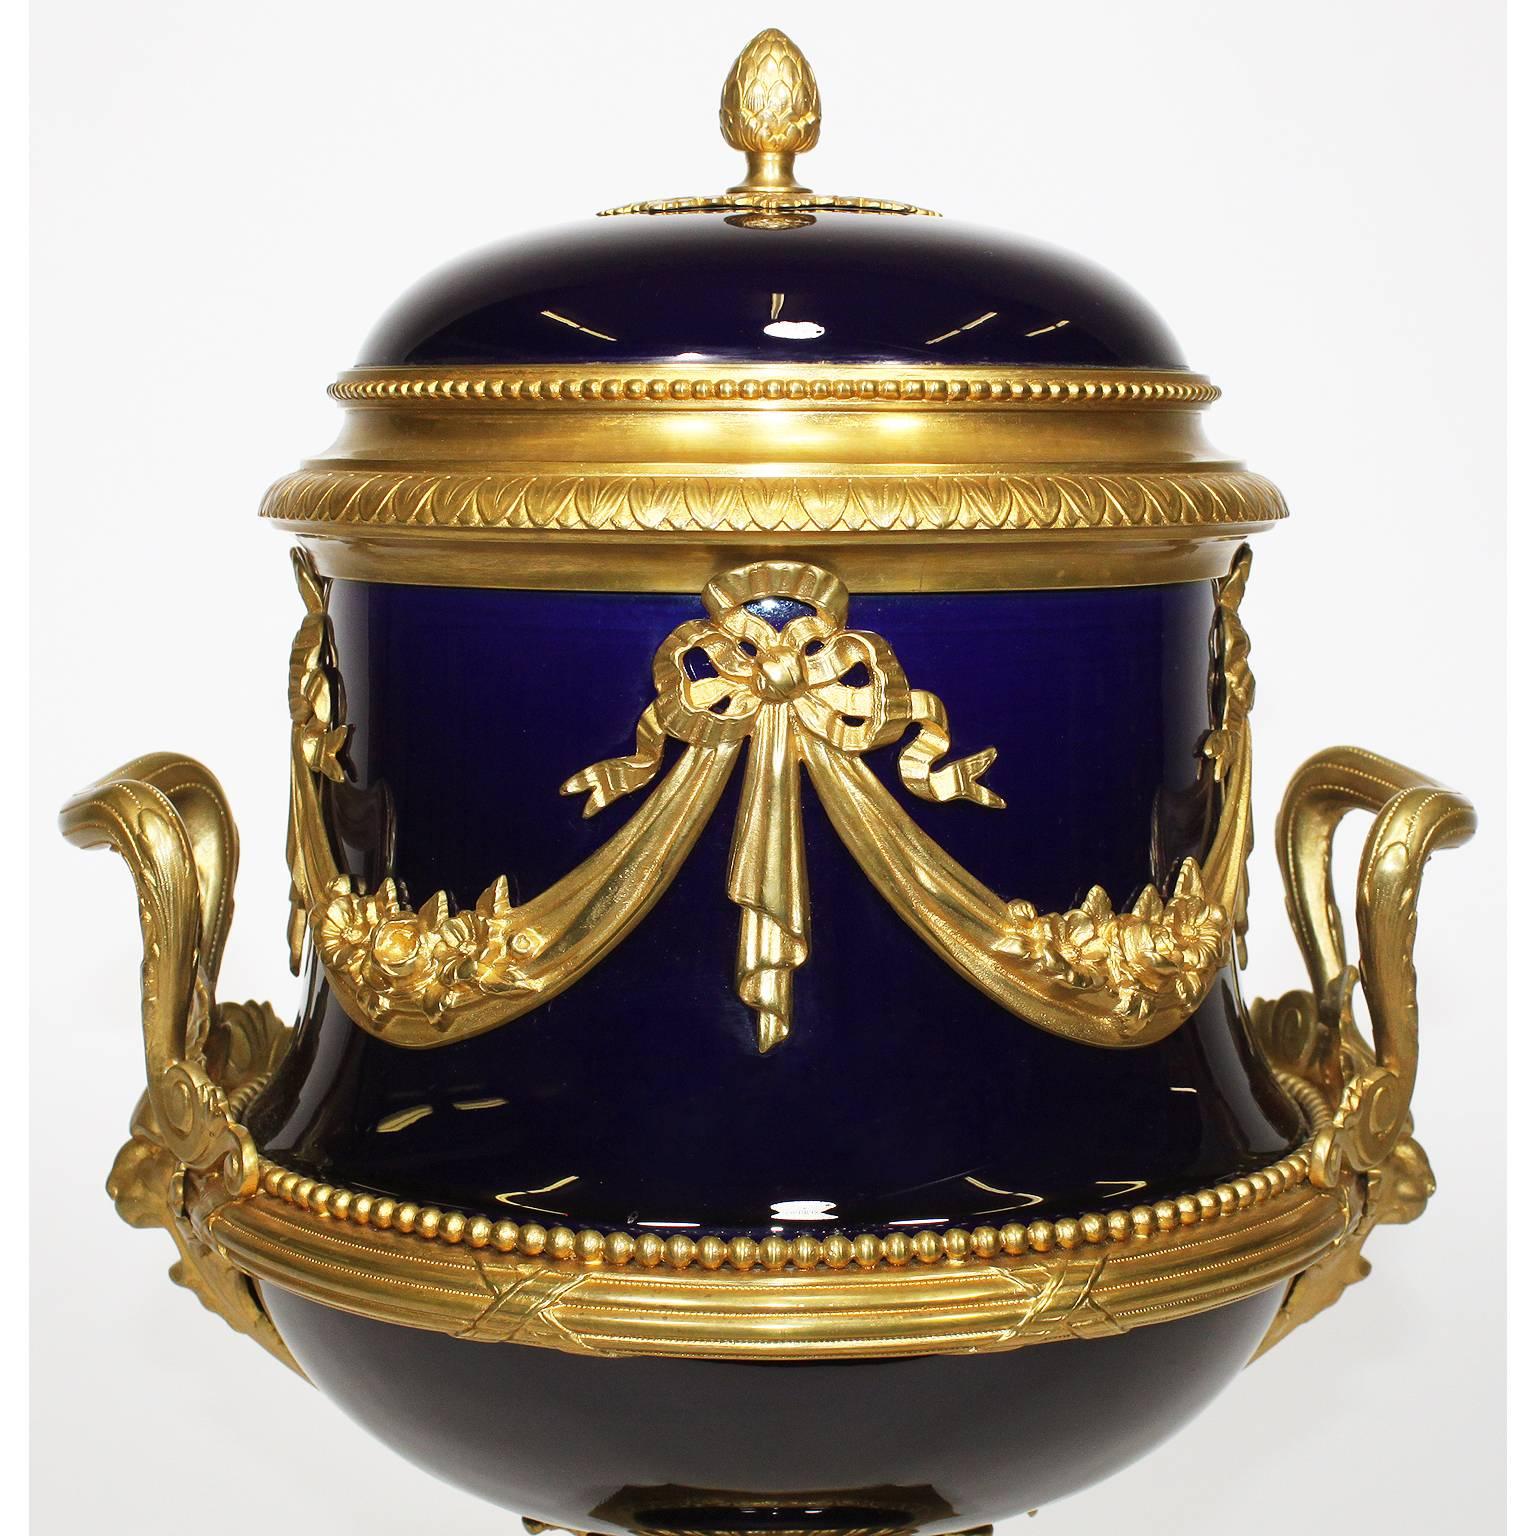 A very fine Napoleon III cobalt blue porcelain and gilt bronze-mounted urn with cover. The trophy shaped urn surmounted with twin scrolled handles, floral tassels tied with ribbons, a banded rim with lion masks, raised on a square gilt-bronze and